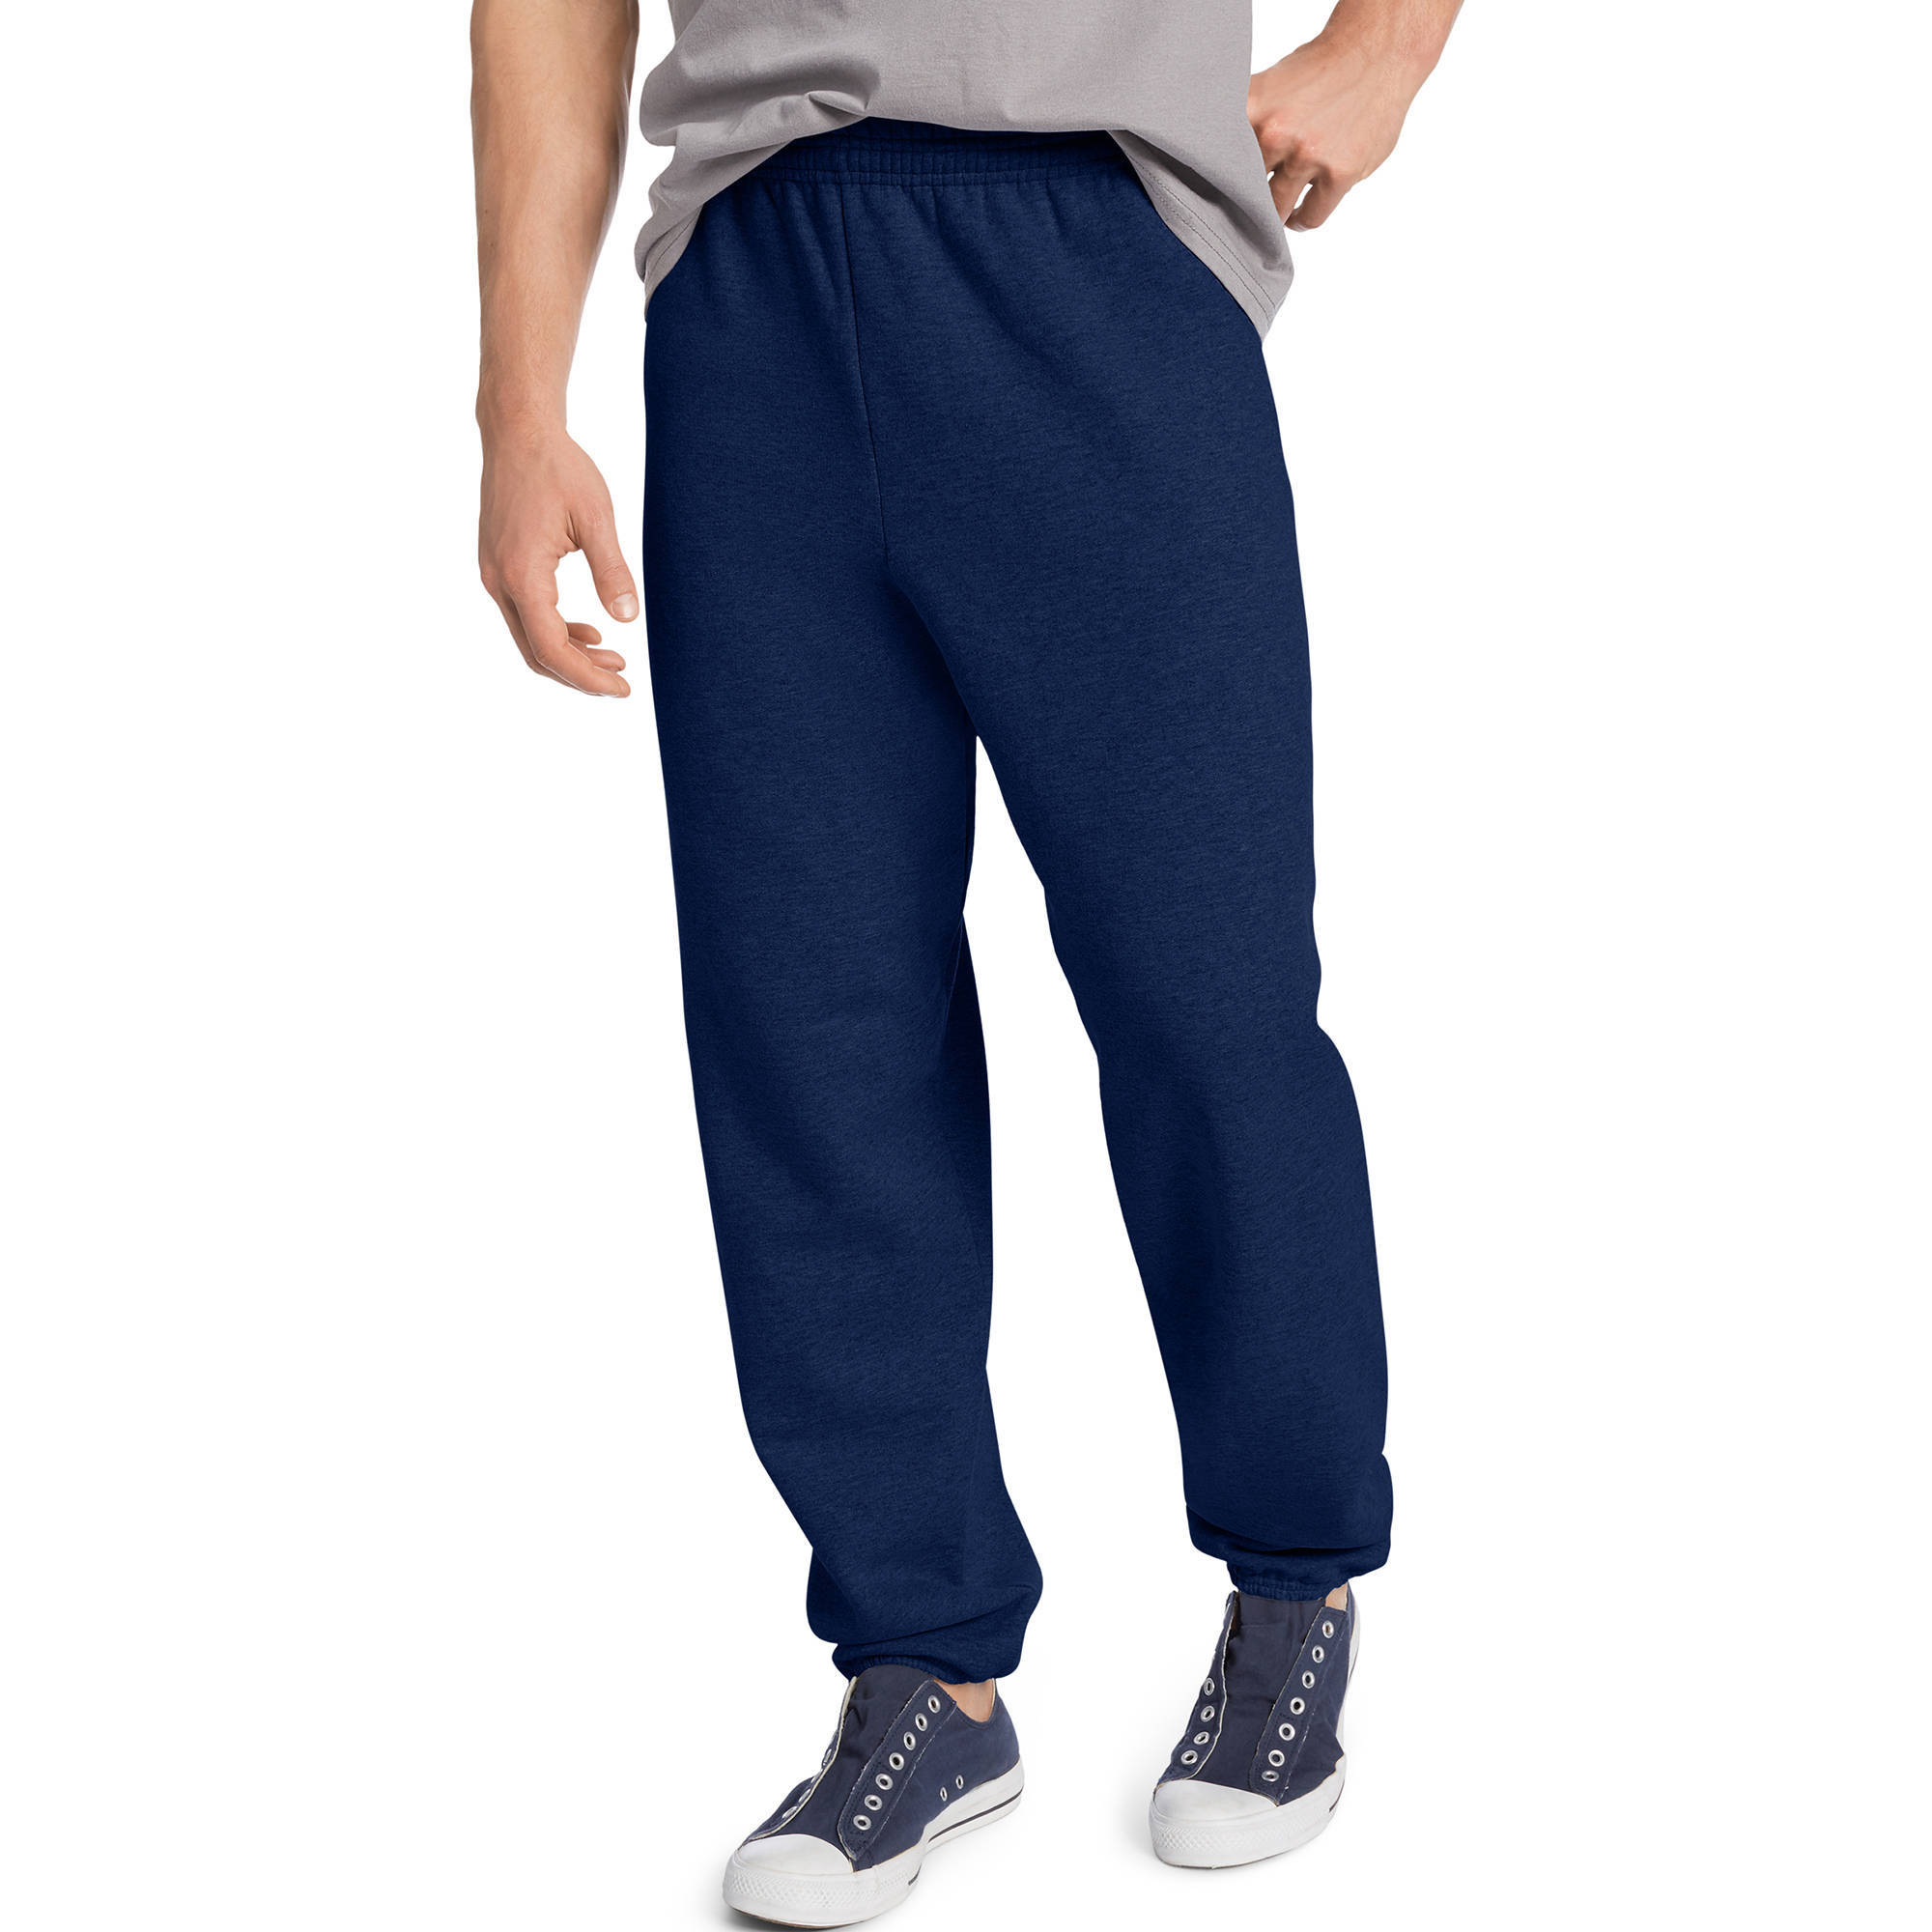 The complete Sweat Pants buying guide: - StyleSkier.com